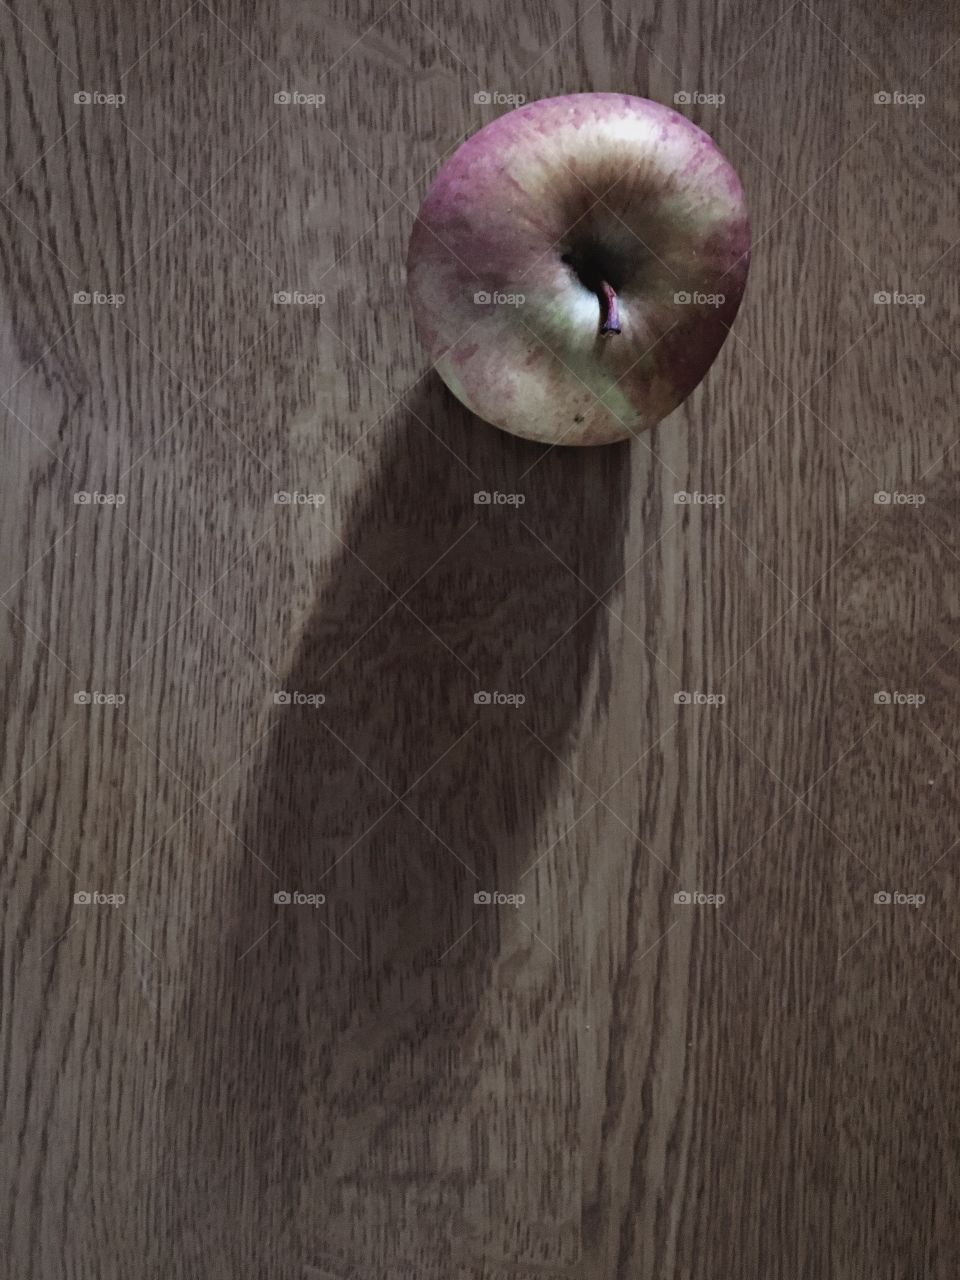 Apple and shadow portrait 